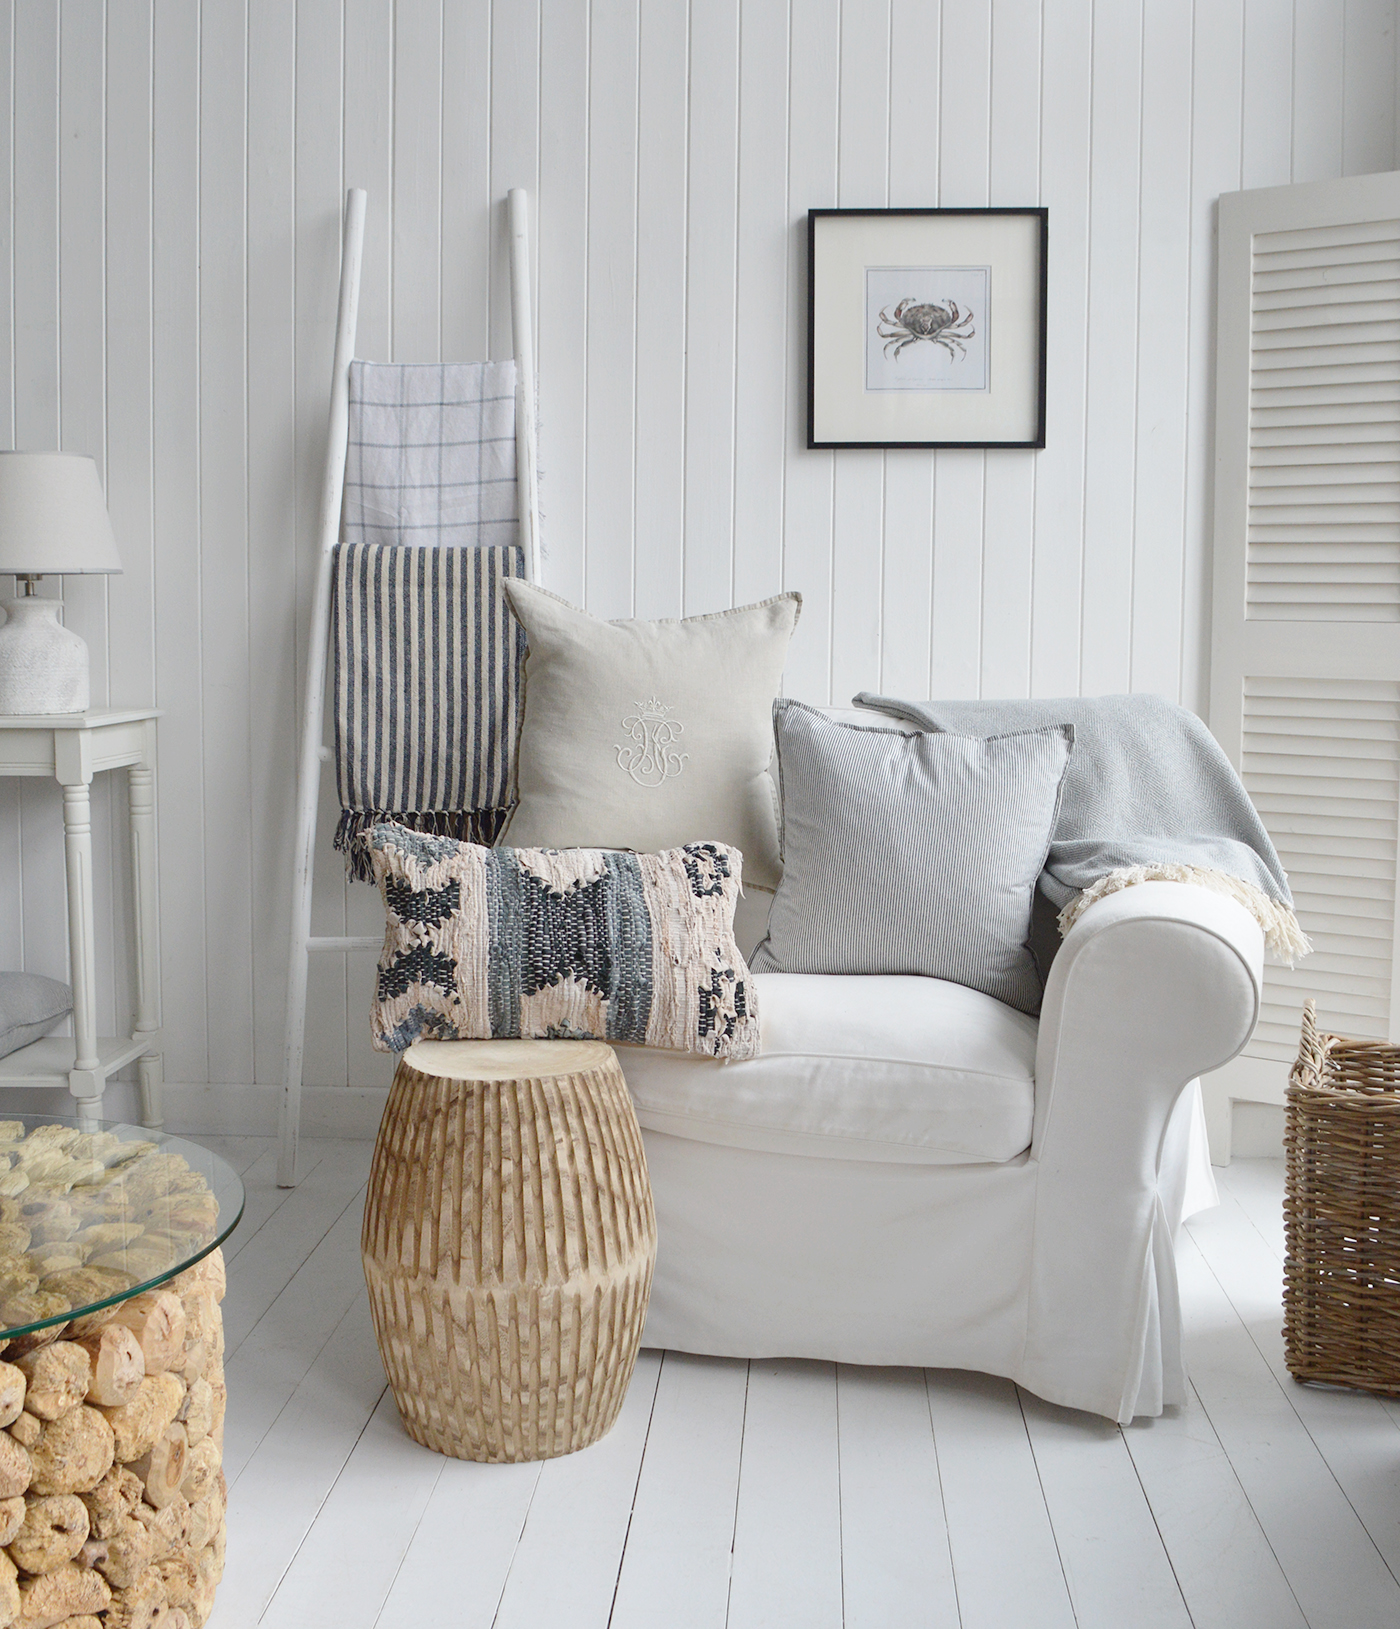 A range of coastal beachhouse furniture including the white blanket ladder and cushions in a Hamptons inspired living room